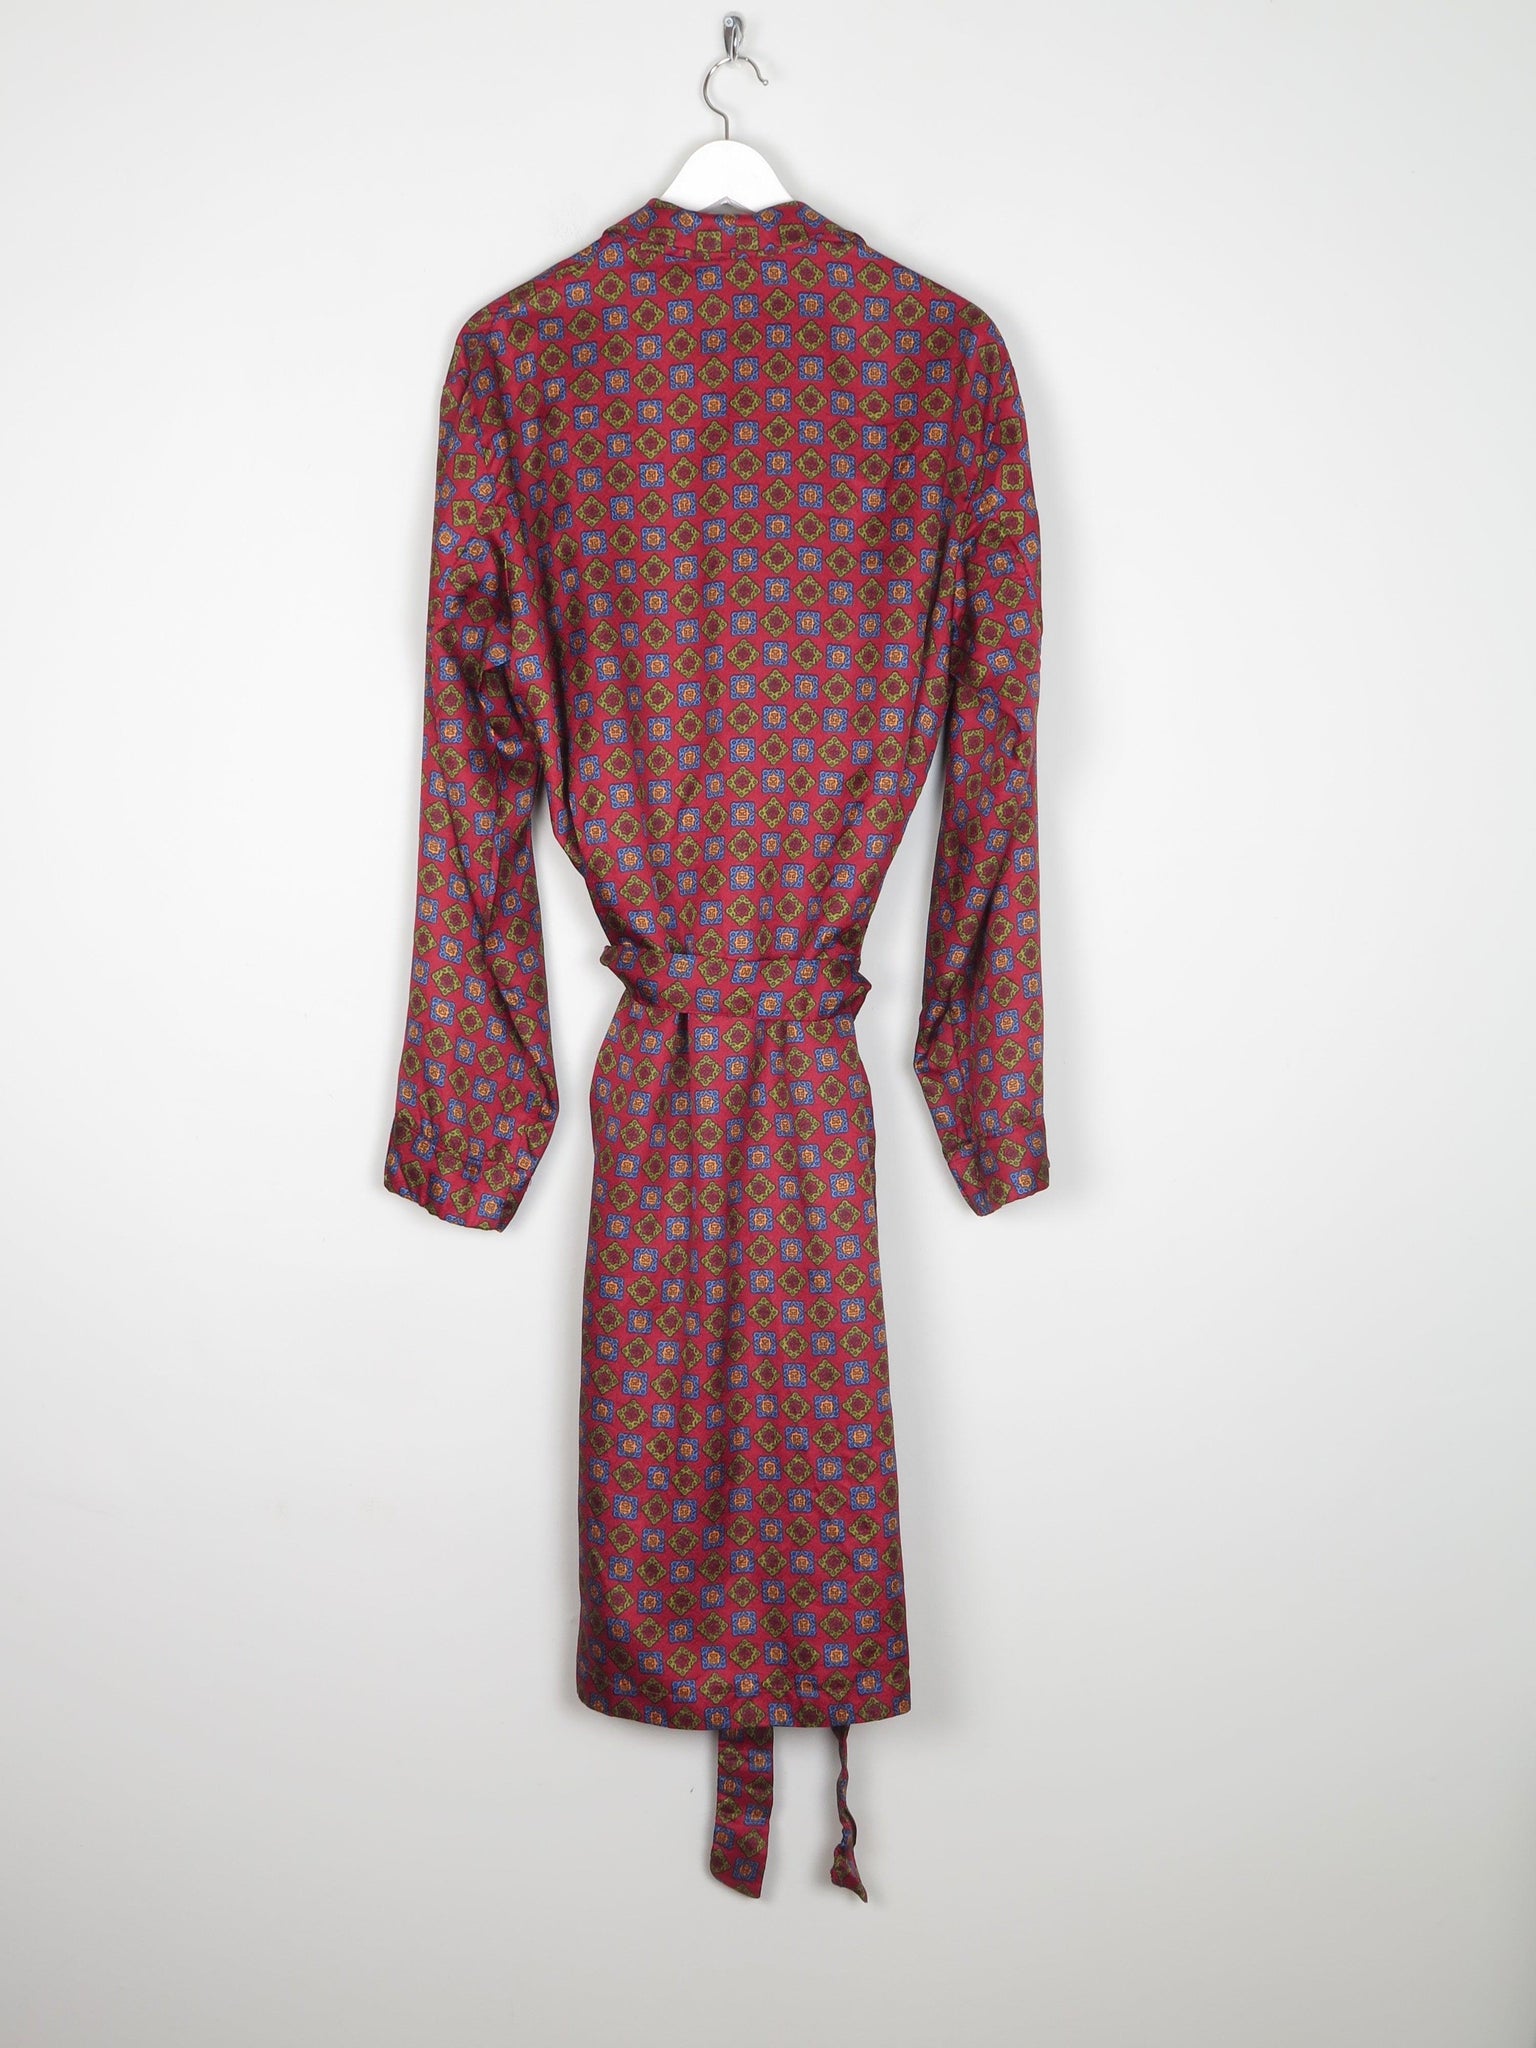 Mens Tootal Hortex Paisley Vintage Smoking Style Dressing Gown M/L - The Harlequin